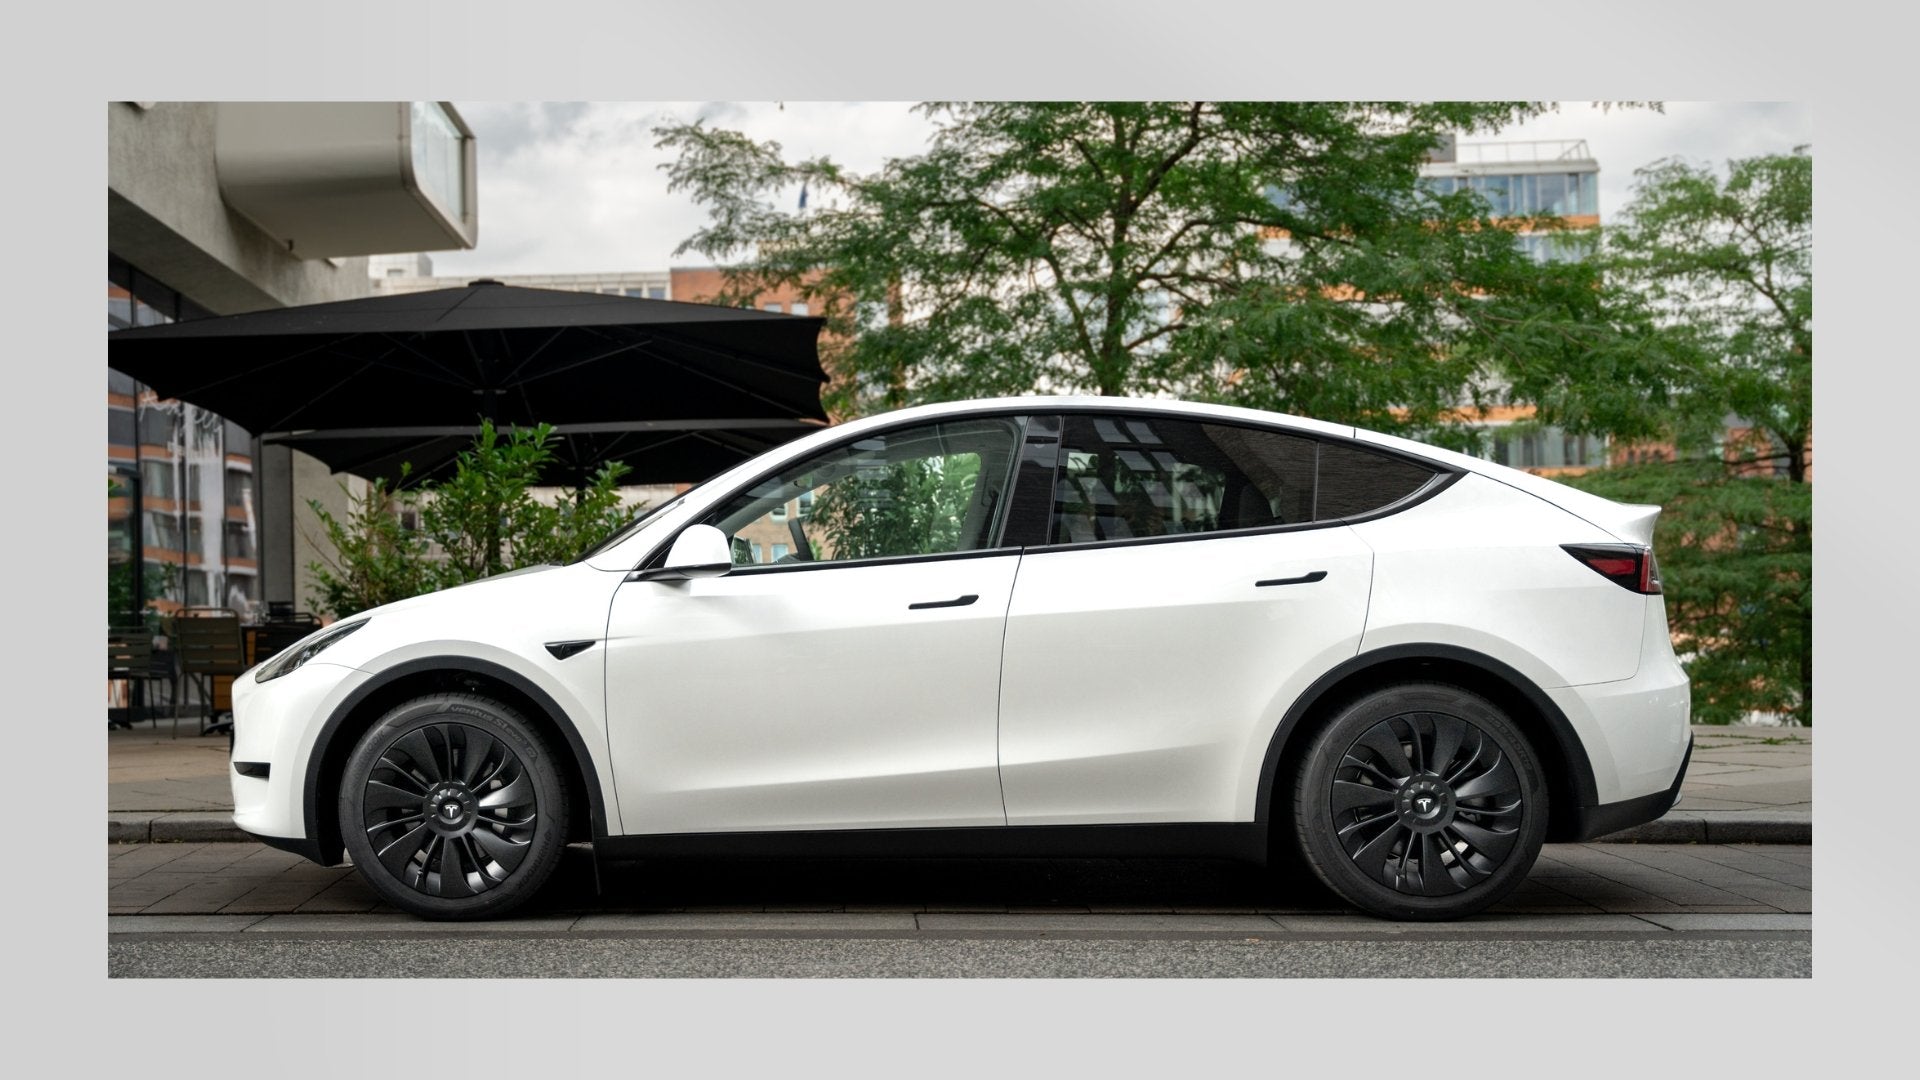 Black accessories hubcaps for the Tesla Model 3/Y you can find in